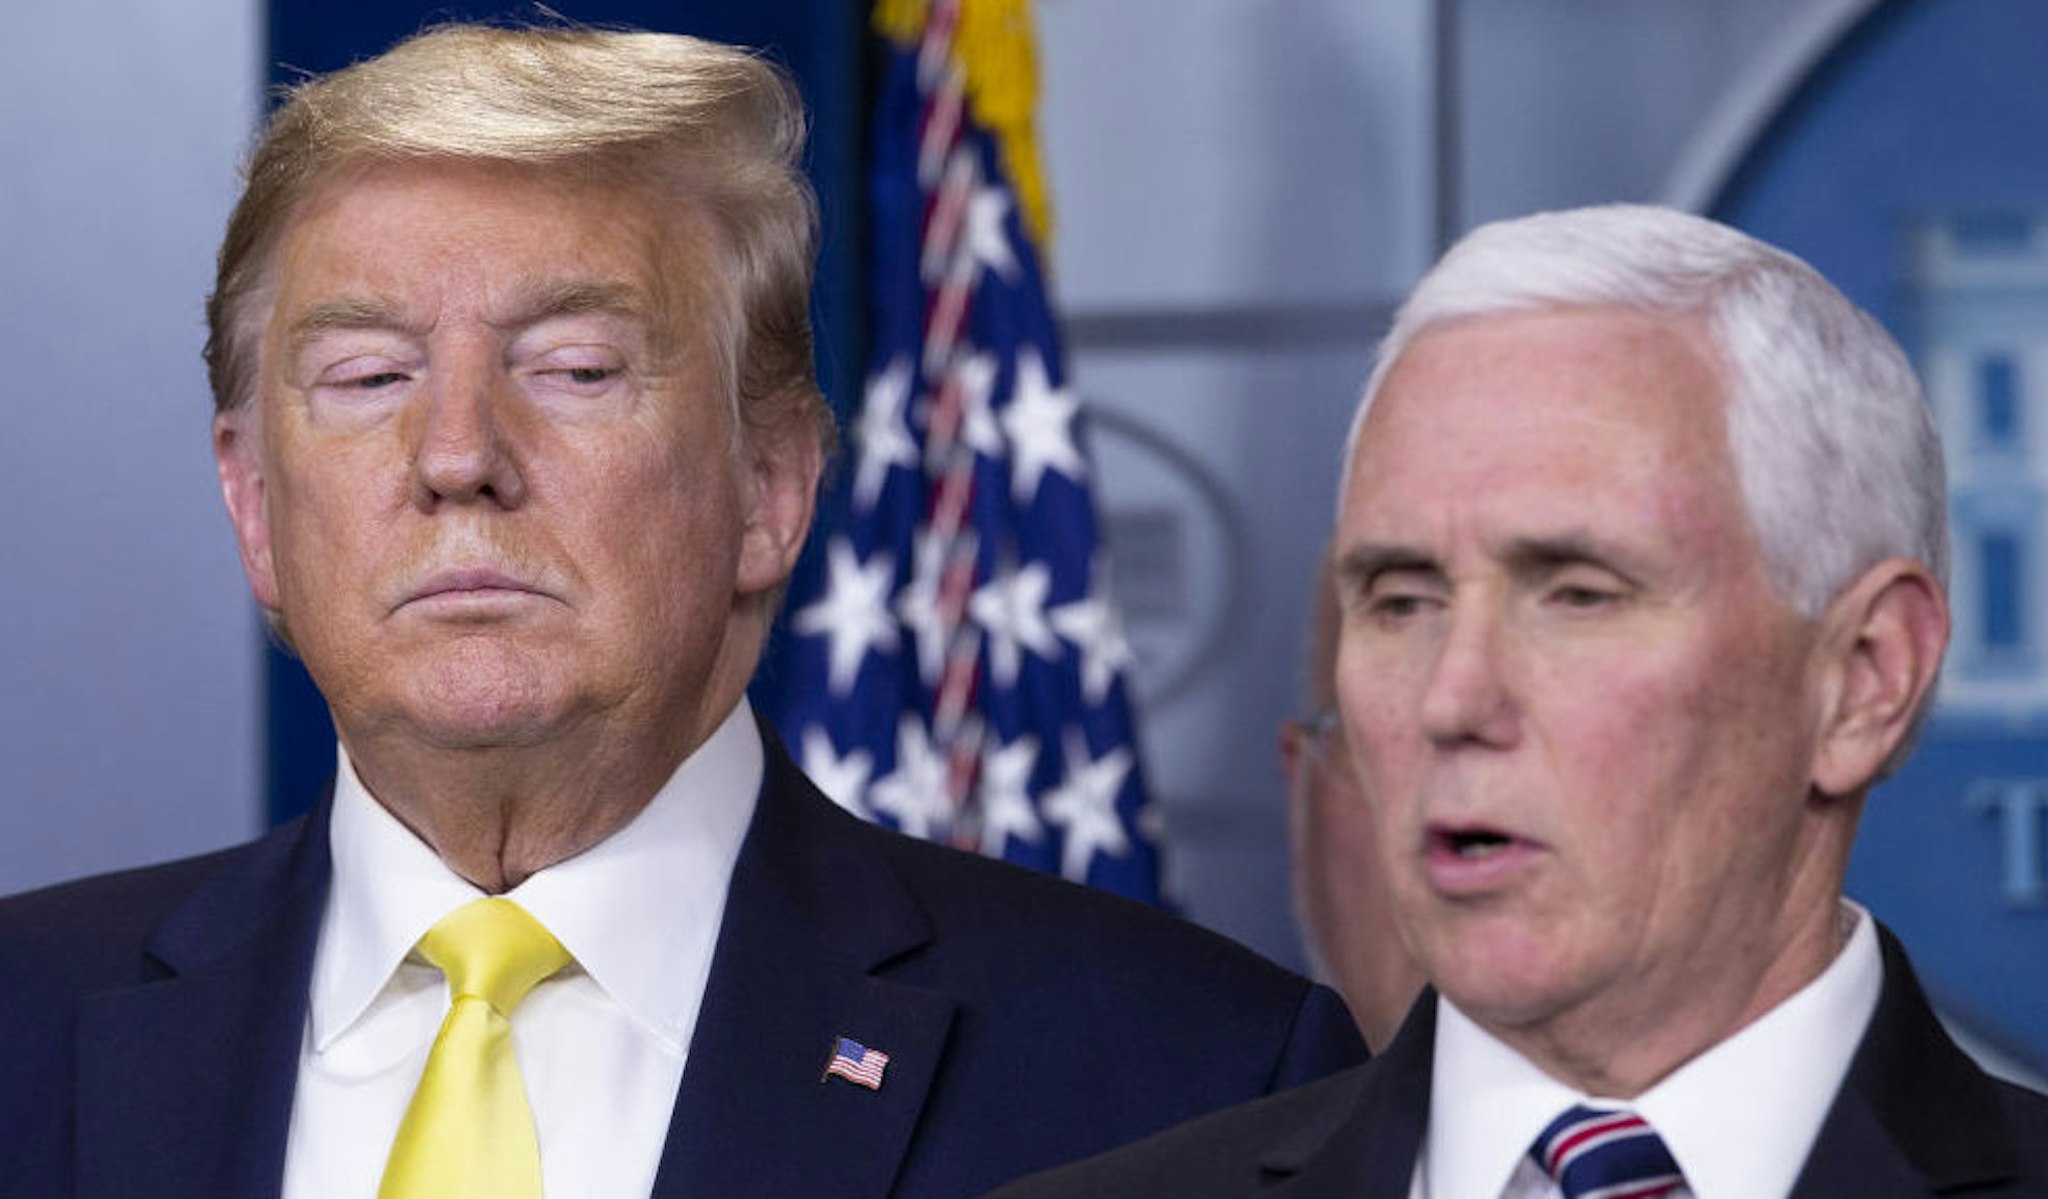 U.S. President Donald Trump, left, listens as Vice President Mike Pence speaks during a news conference in Washington, D.C., U.S., on Monday, March 9, 2020.